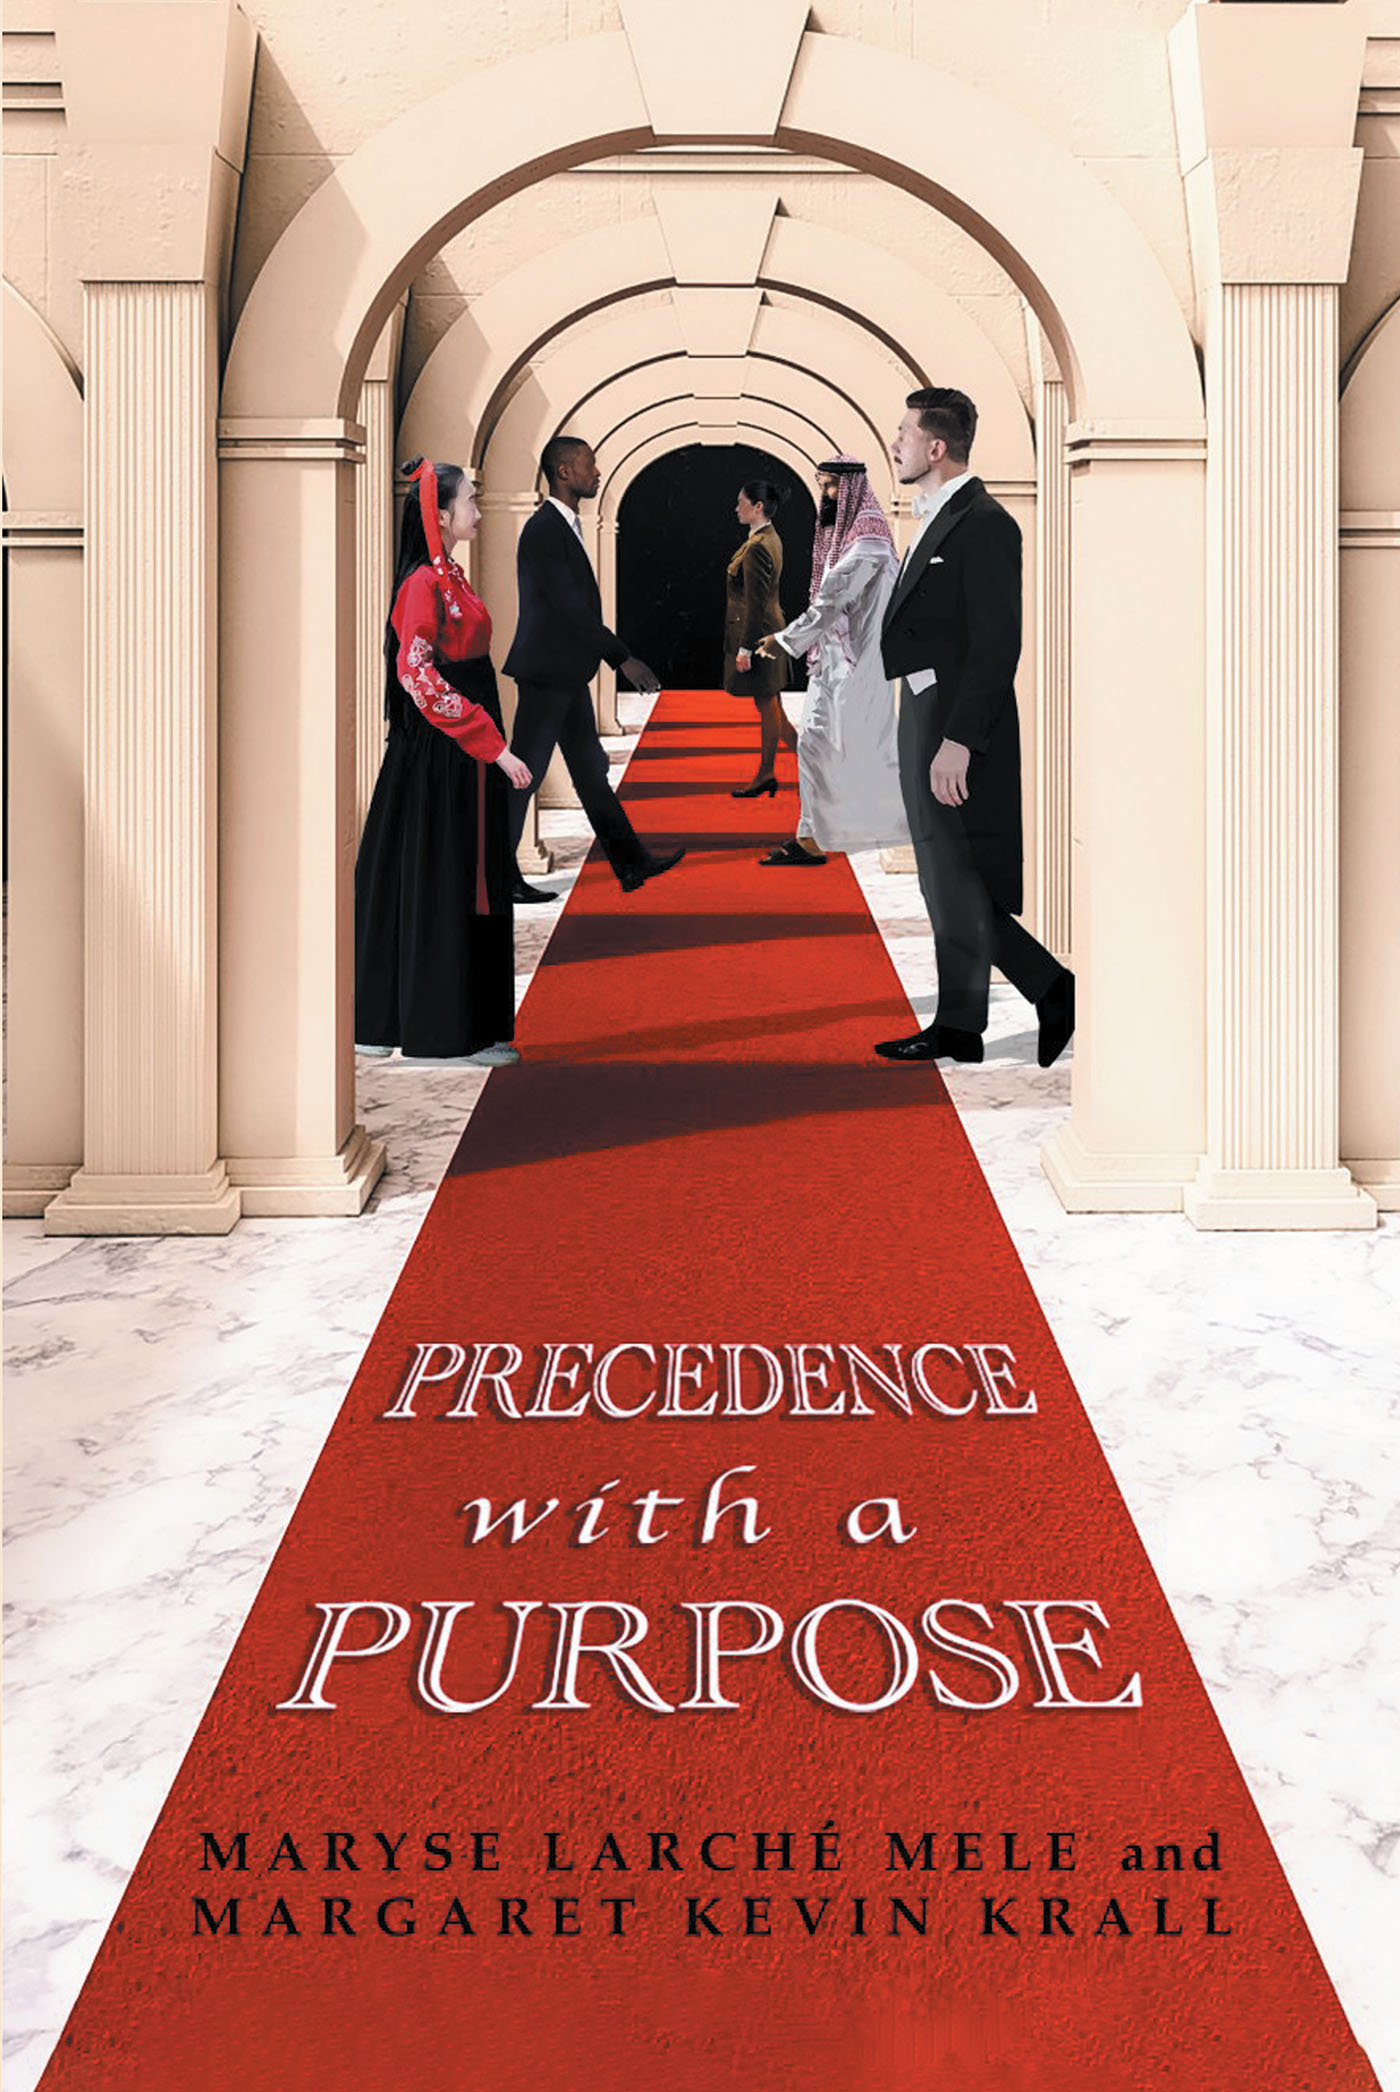 Authors Maryse Larché Mele and Margaret Kevin Krall’s New Book, "Precedence with a Purpose," Serves as the Source on How to Address International Precedence